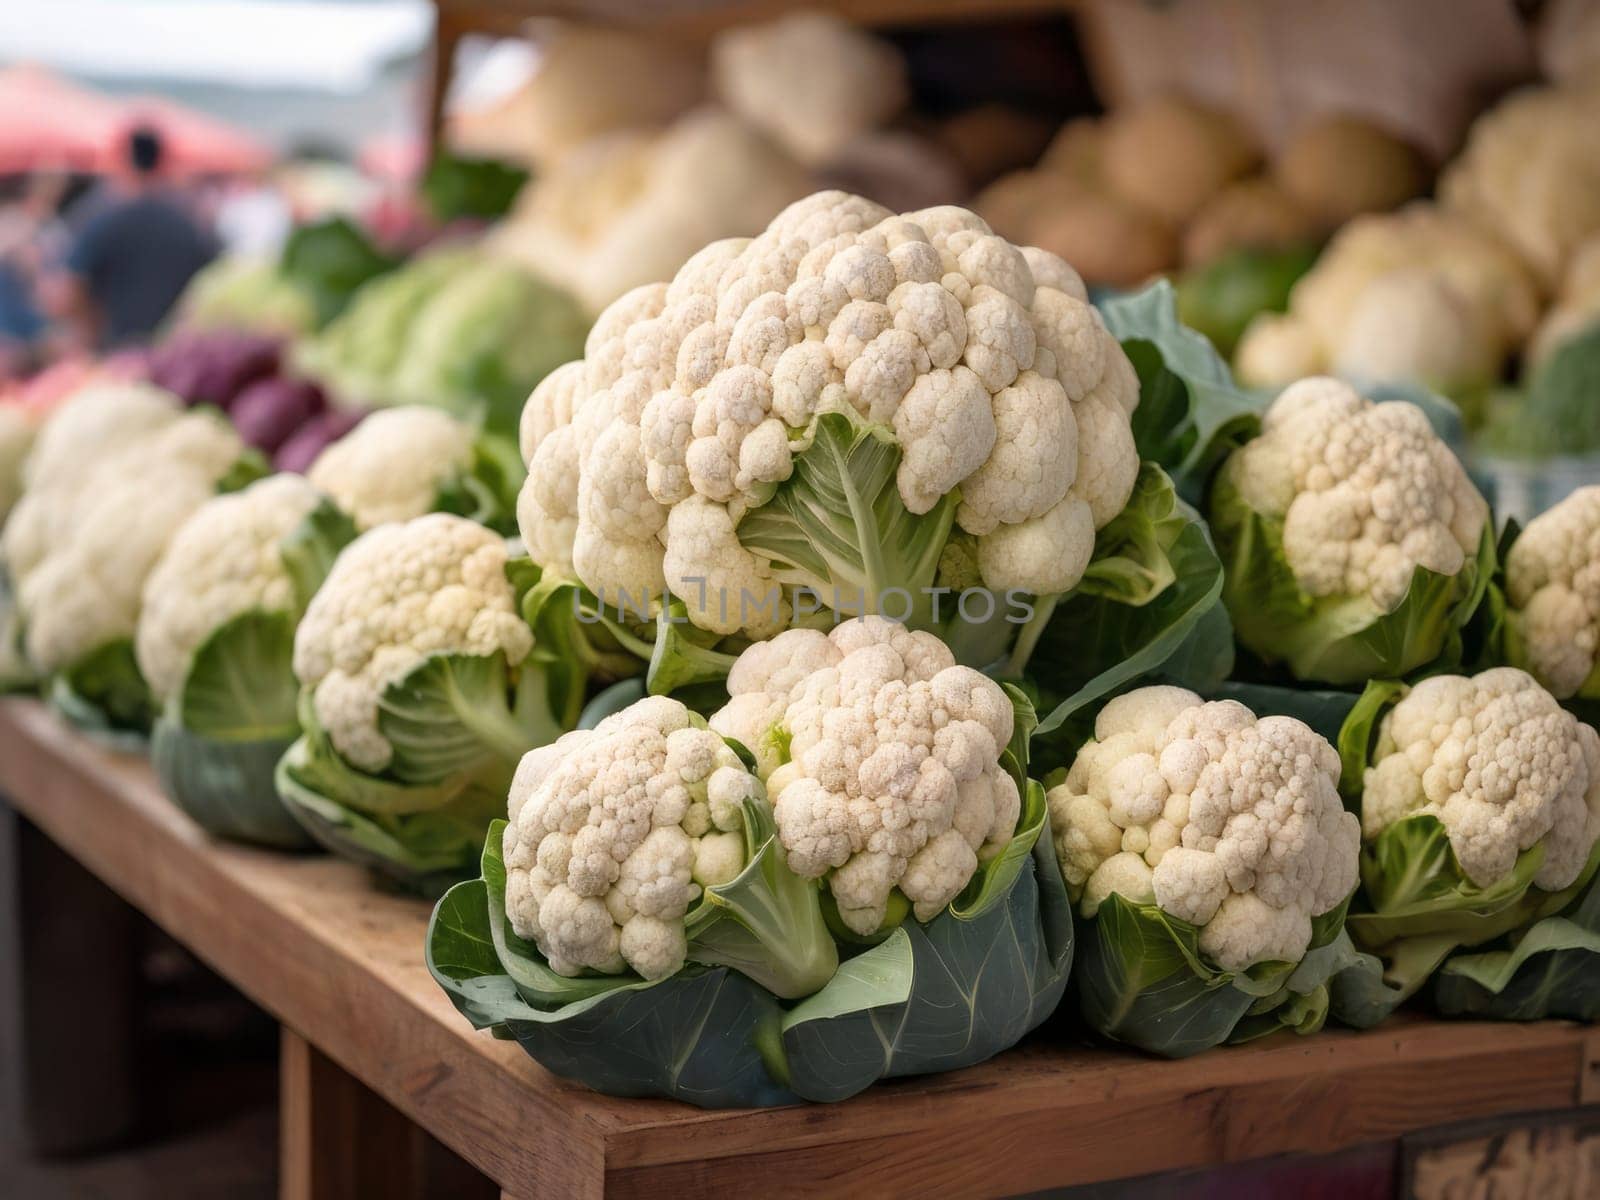 A vibrant display of fresh organic cauliflower at a local farmer's market, showcasing the natural beauty of the vegetable and the vibrant atmosphere of the market